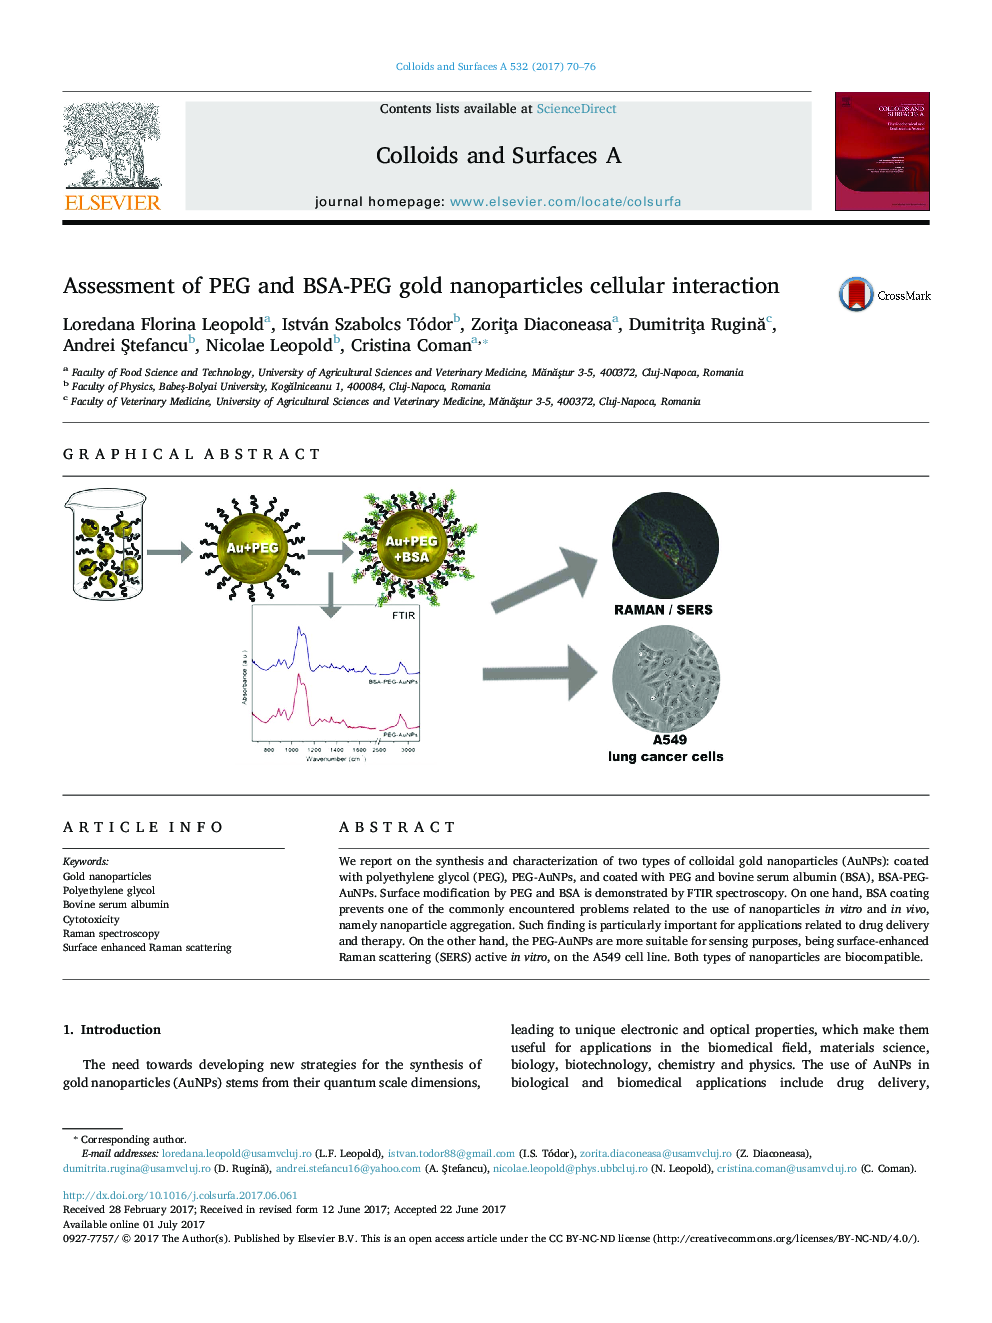 Assessment of PEG and BSA-PEG gold nanoparticles cellular interaction